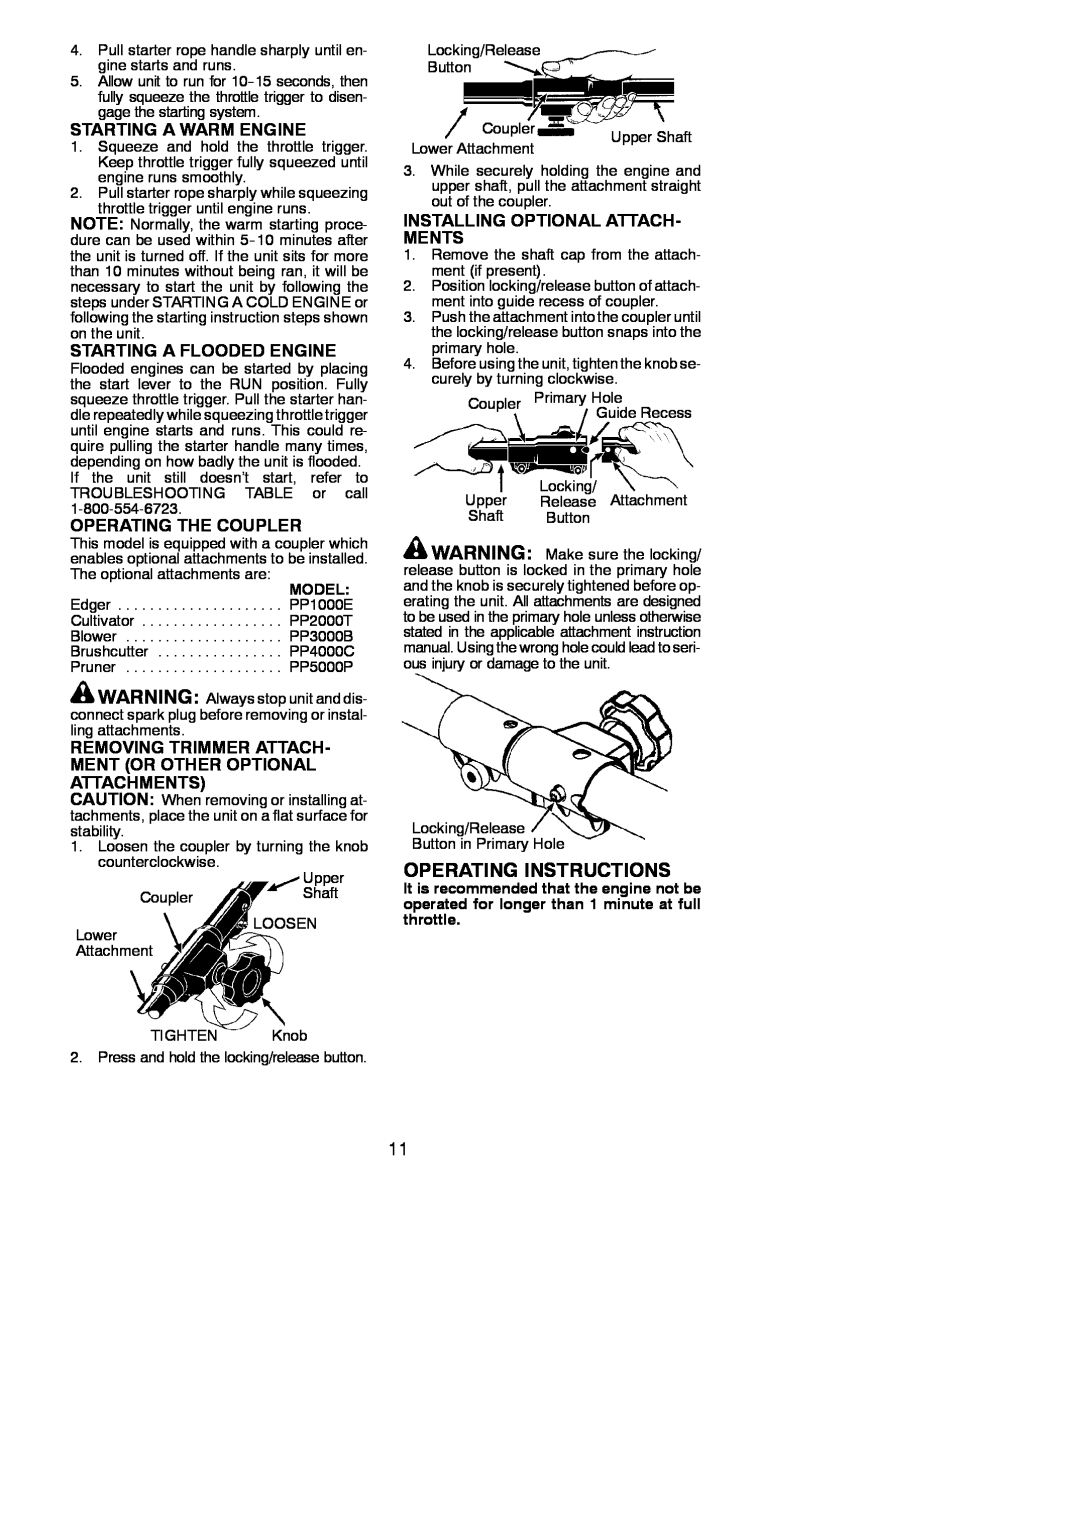 Poulan 545177328 Operating Instructions, Starting A Warm Engine, Starting A Flooded Engine, Operating The Coupler 